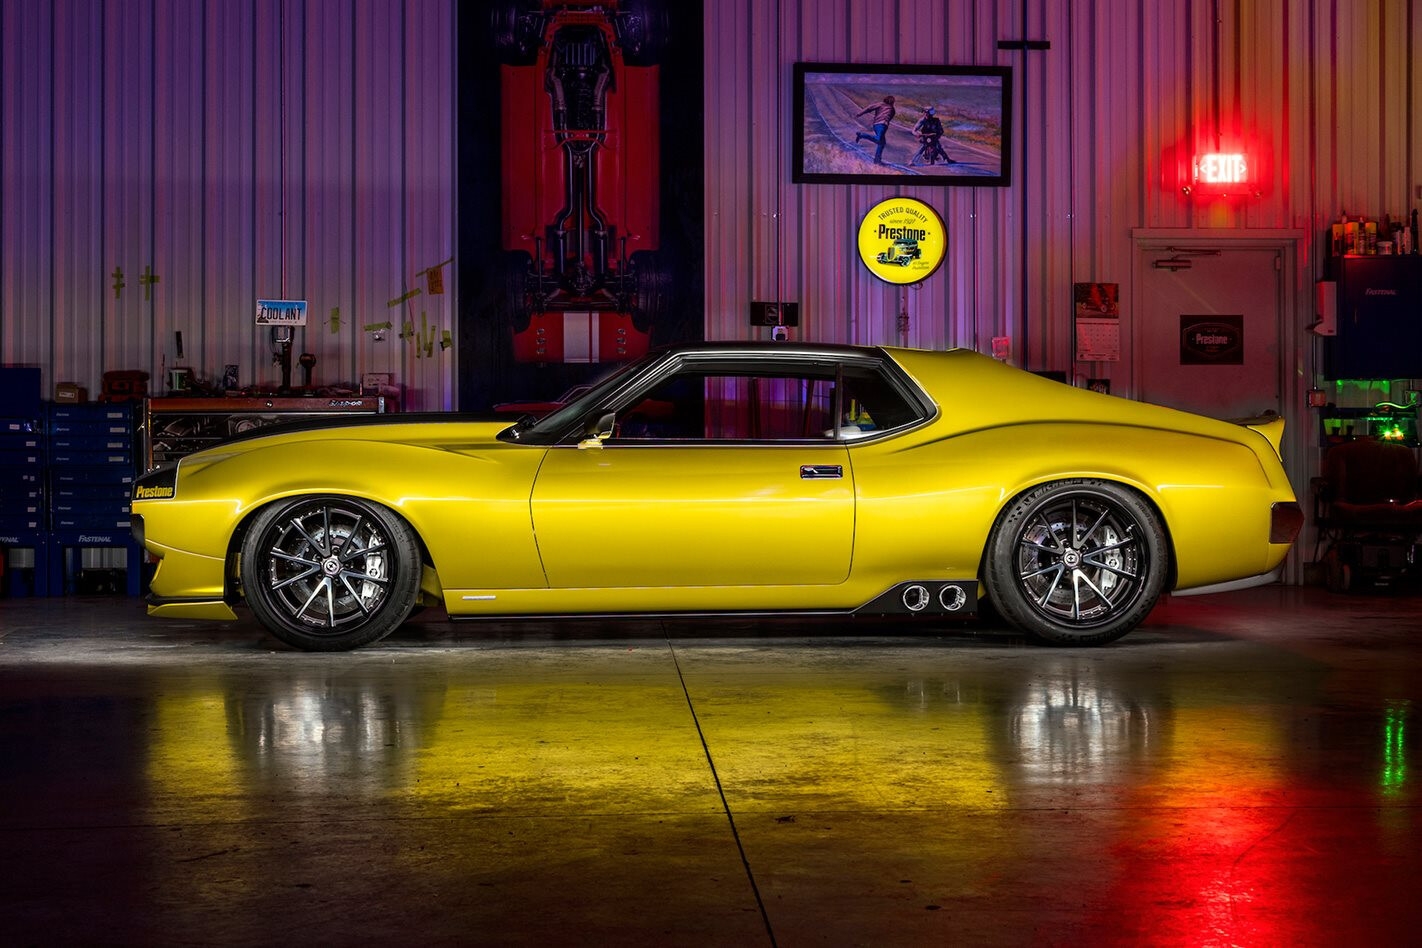 Hellcat-powered Ring Brothers’ AMX Javelin